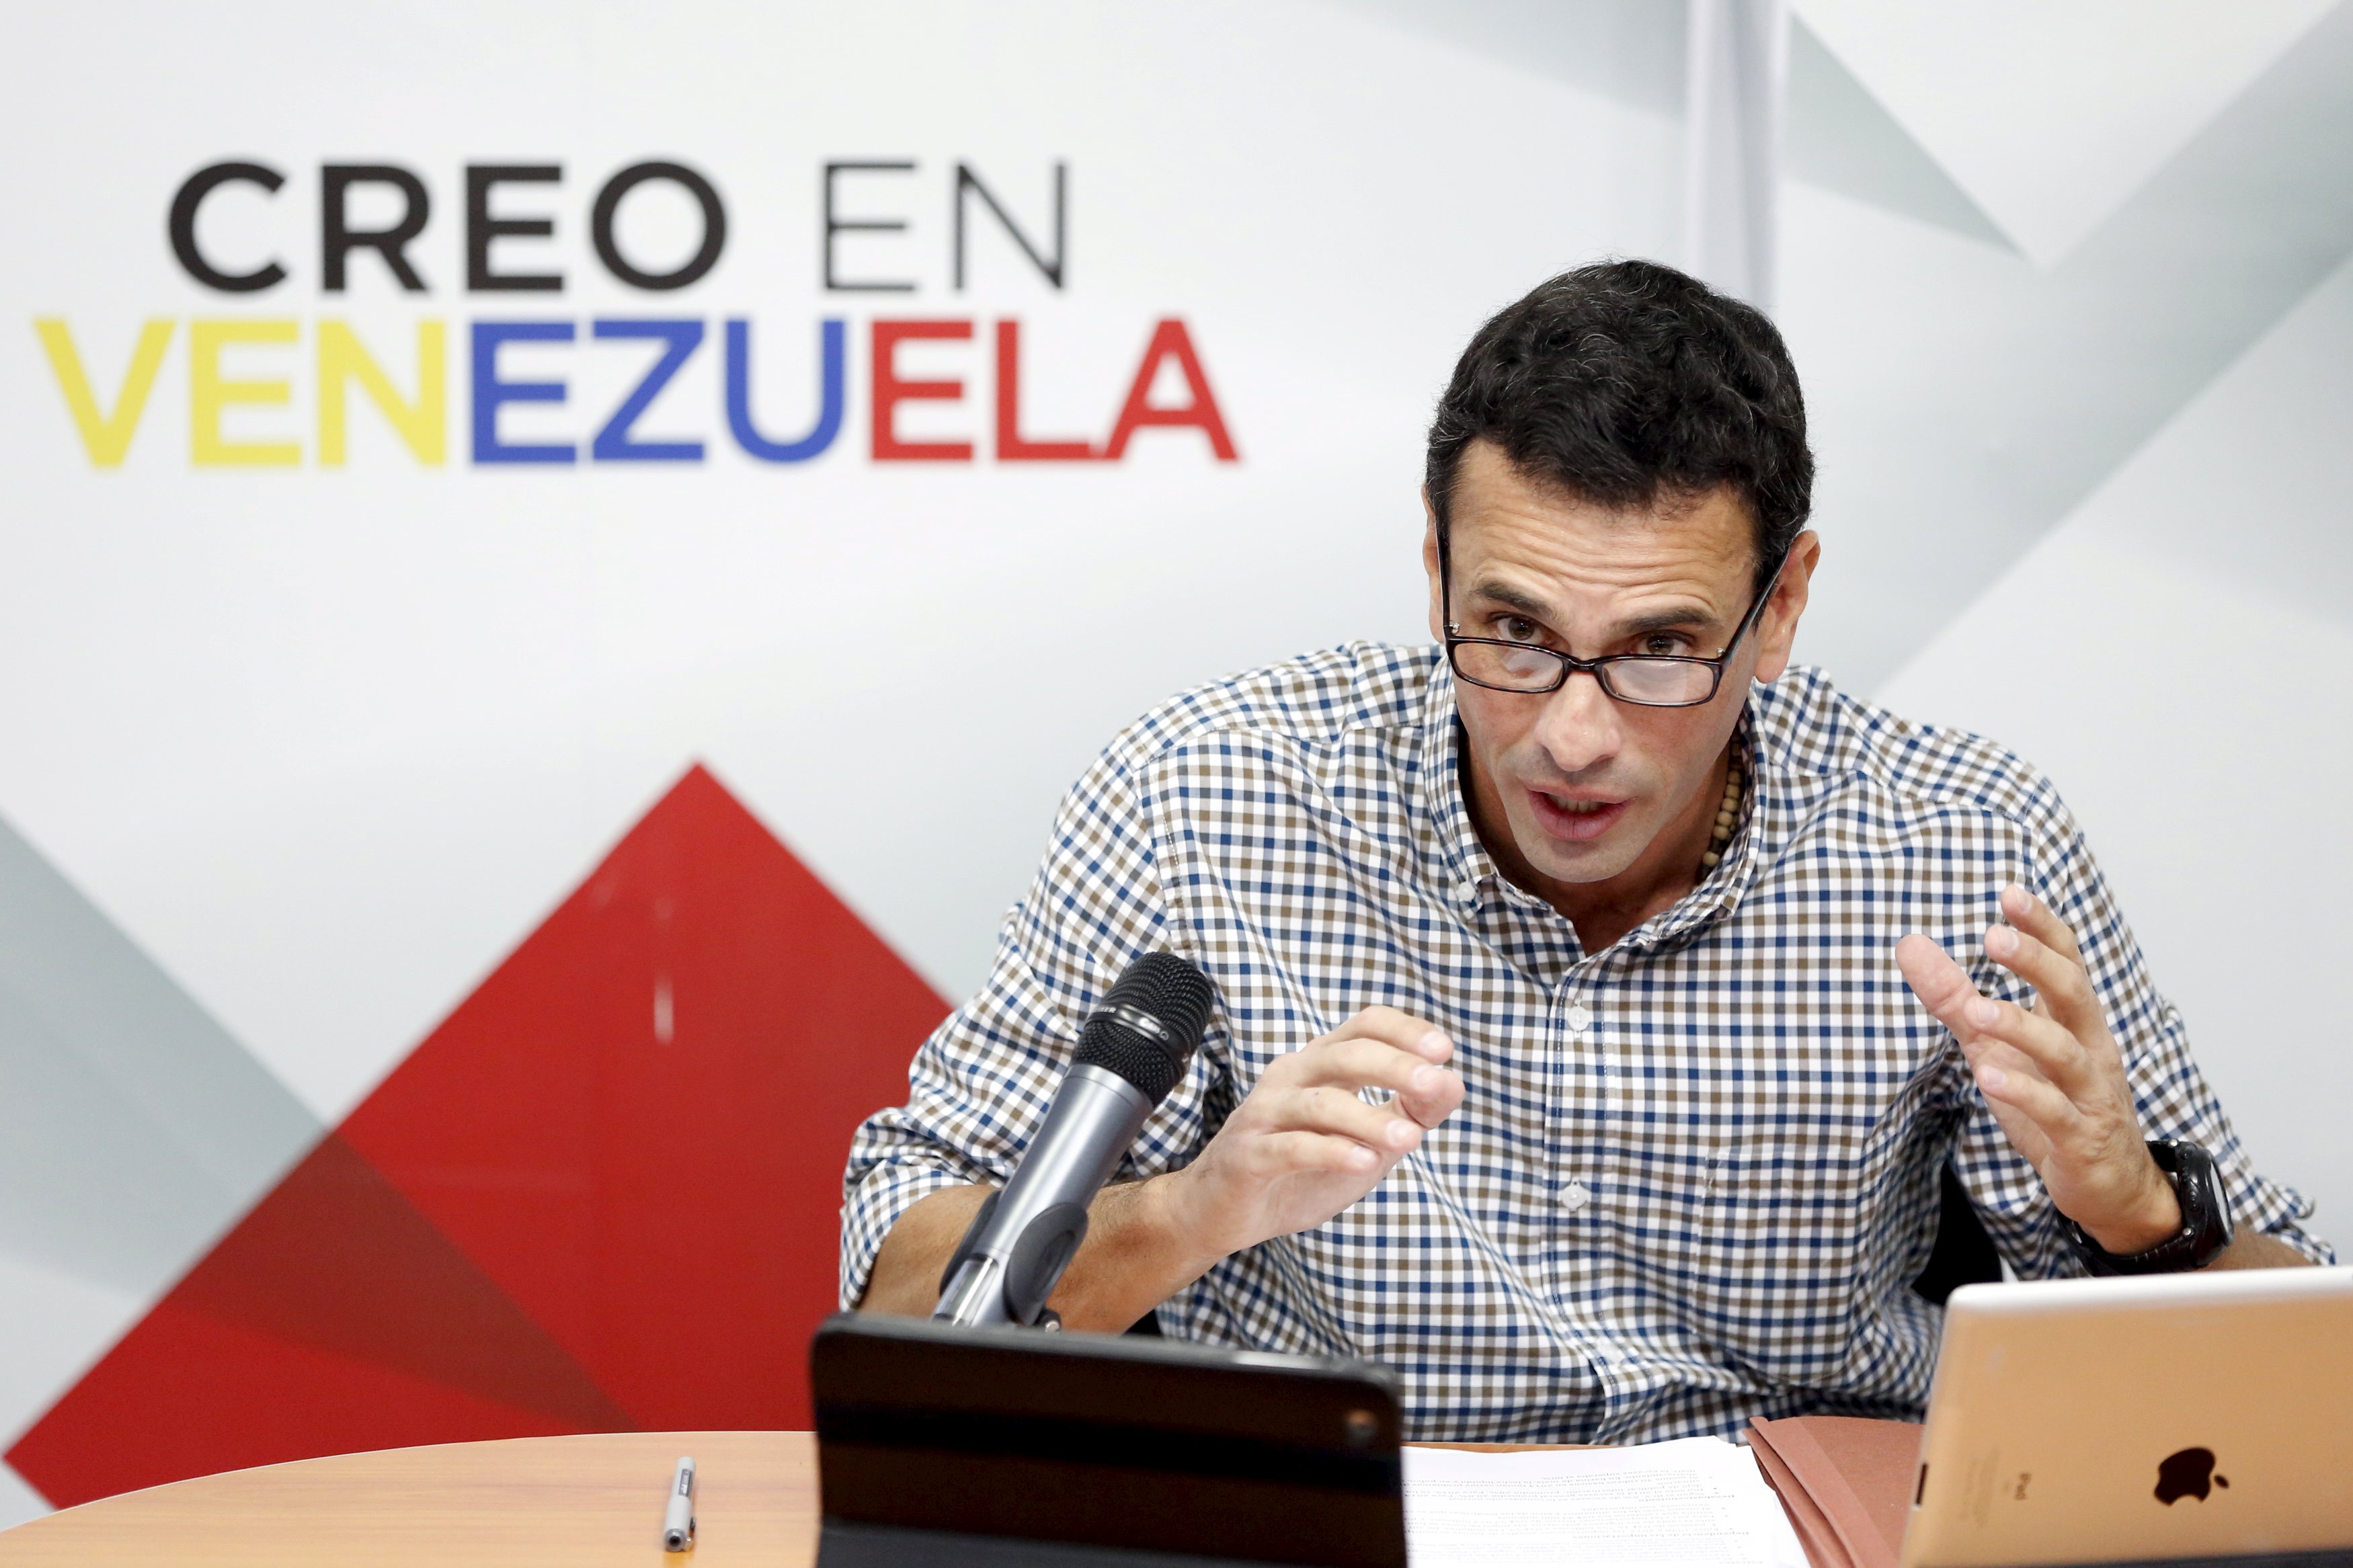 One of Venezuela's opposition leaders, Henrique Capriles talks to the media during a news conference in Caracas Dec. 21, 2015.